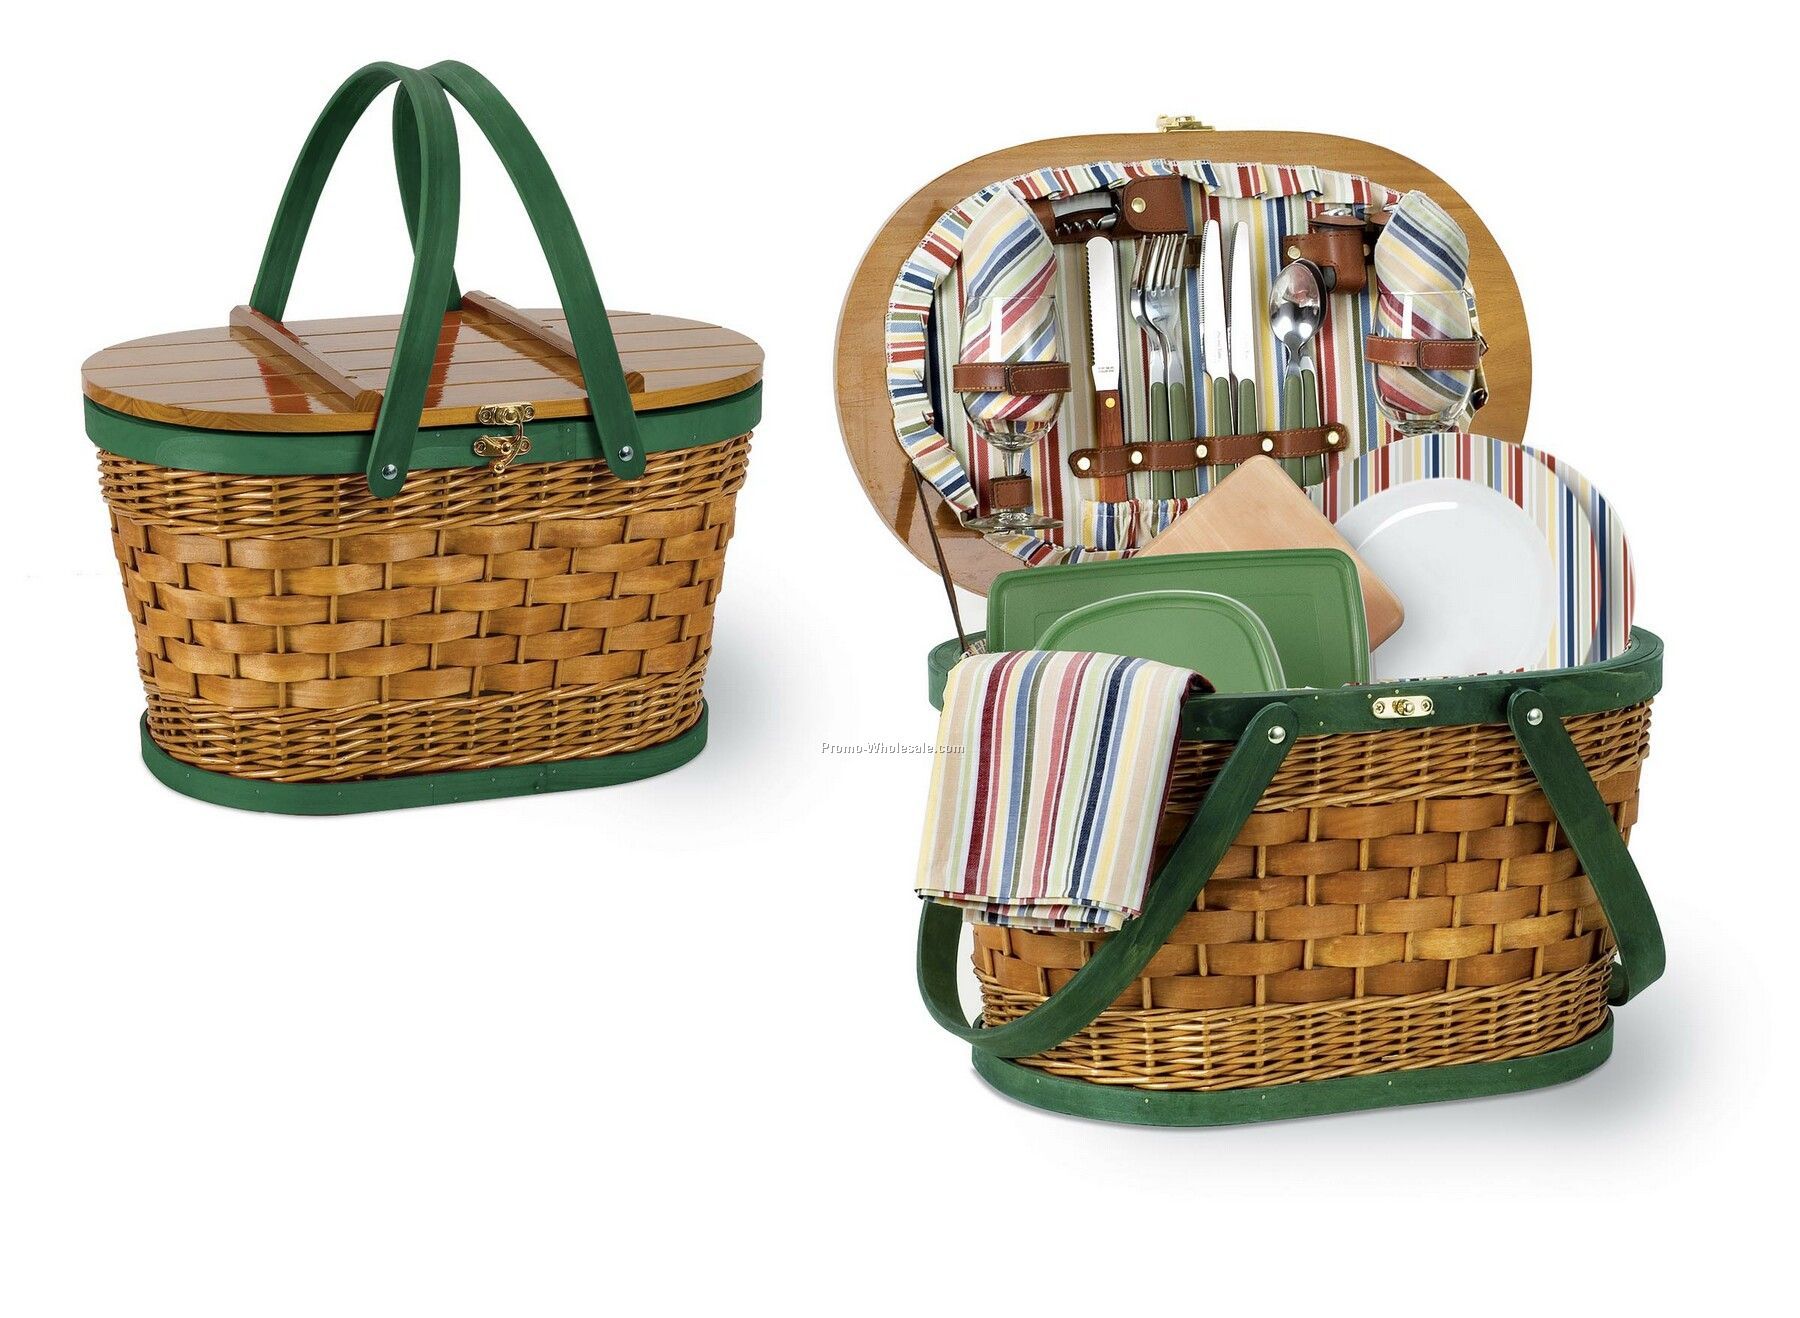 Catalina - Riviera Classic Oval Shaped Picnic Basket With Service For 2